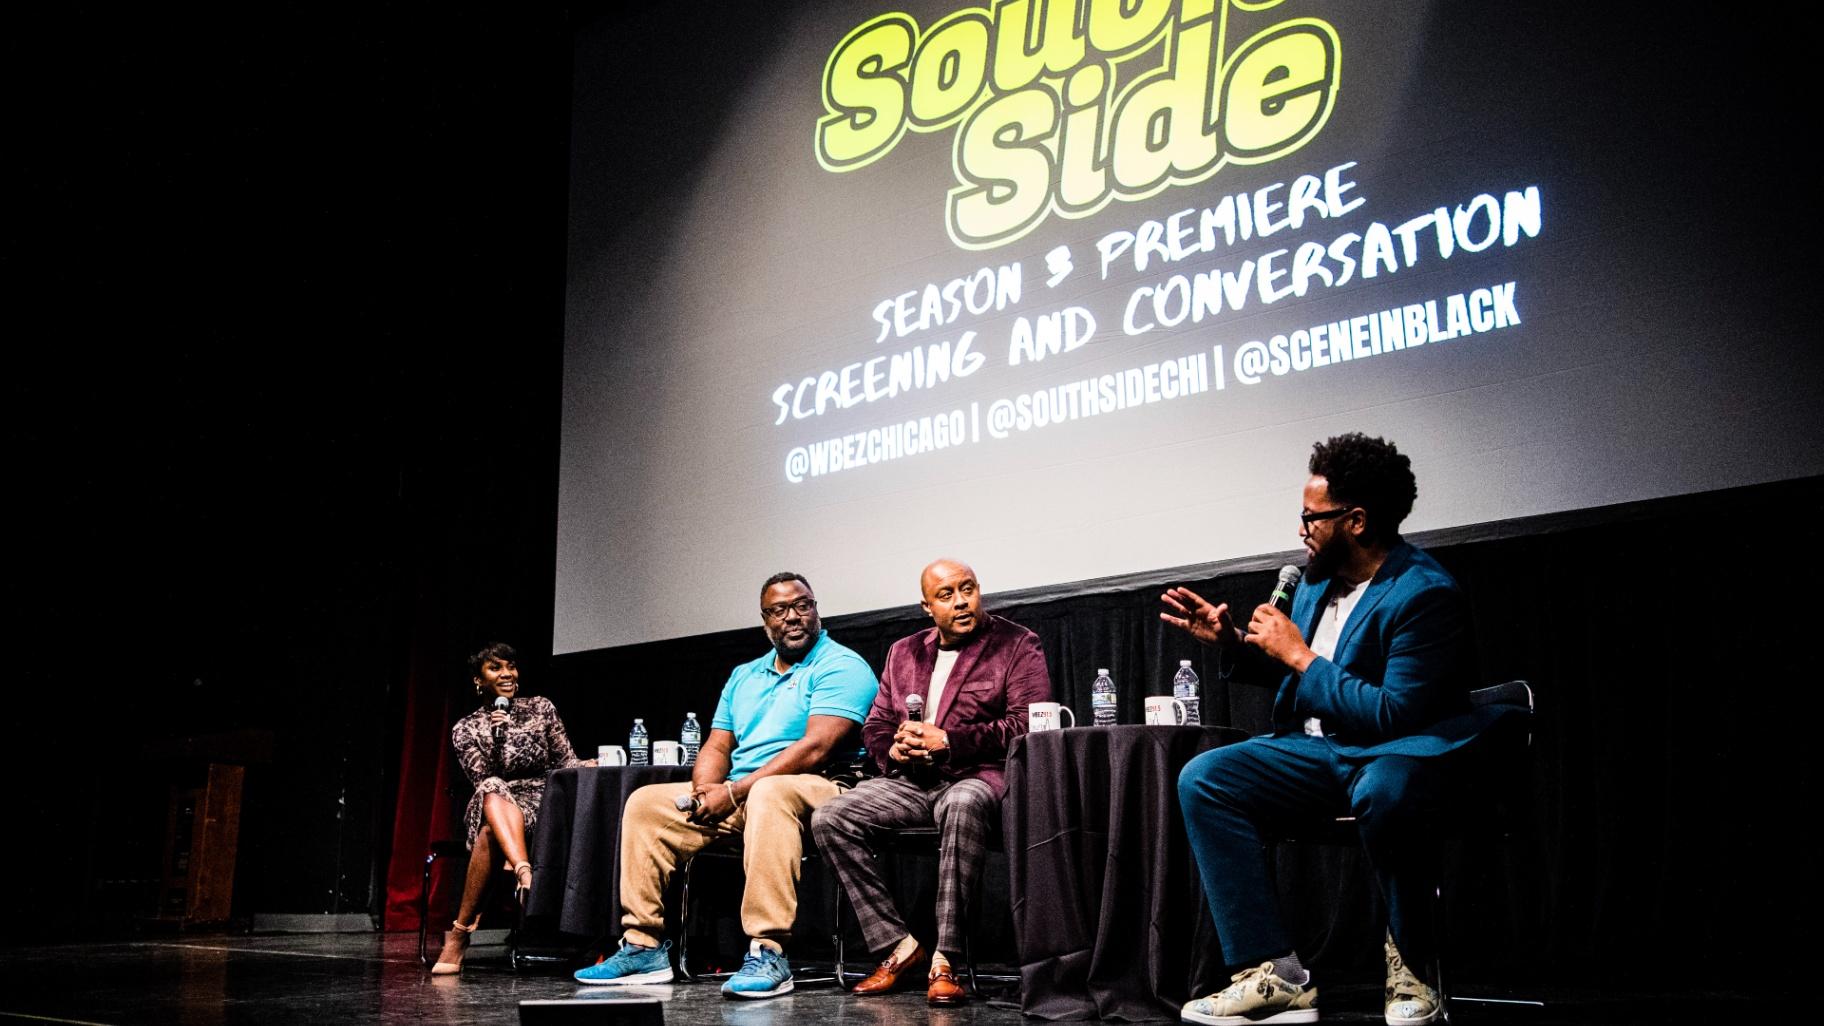 WBEZ hosted a screening of “South Side” season three at the DuSable Museum on Dec. 6, 2022. (Credit: Joe Nolasco for WBEZ Chicago, Instagram @nolasco_giovanni)